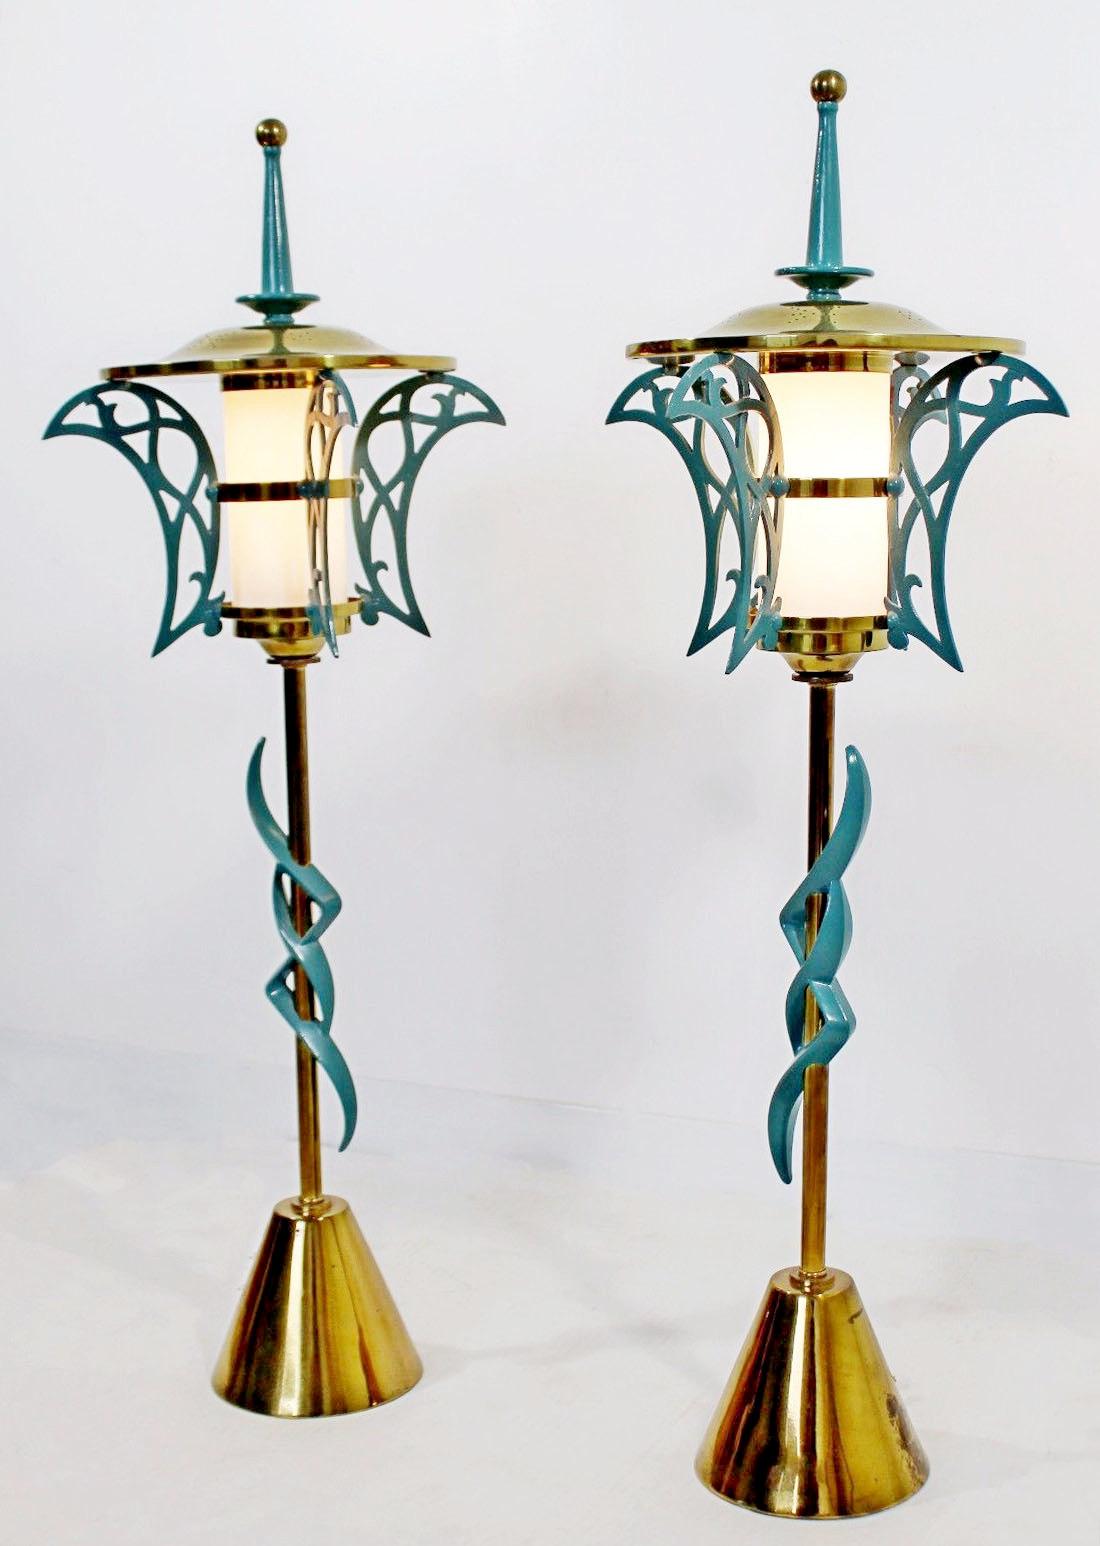 For your consideration is a magnificent pair of solid brass table lamps, cold painted, with wood finials and glass inserts, from Rembrandt, circa 1957. From the Doral Country Club. In excellent vintage condition. See pictures for condition. The